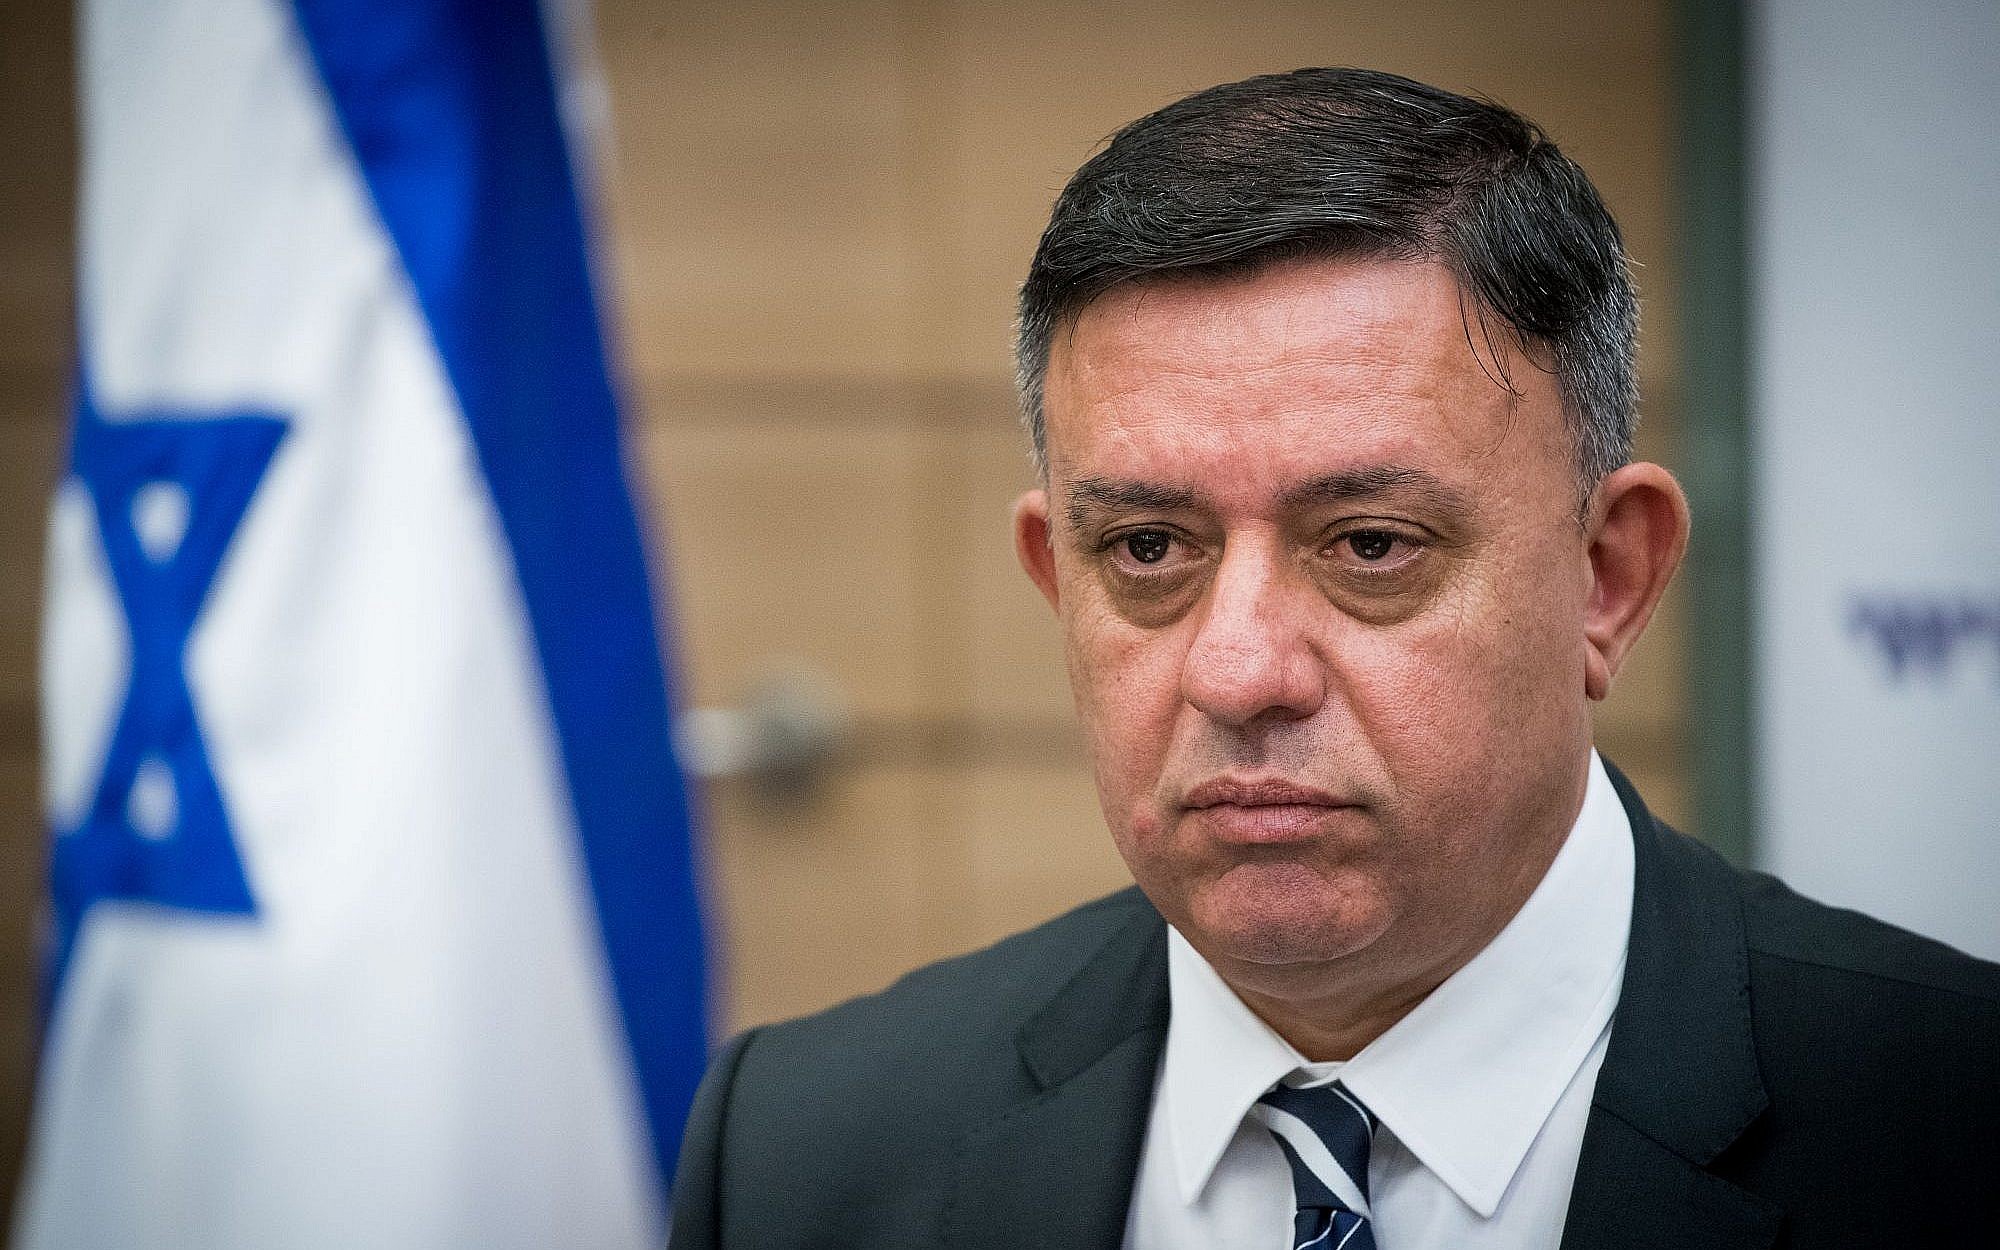 Echoing Netanyahu, Labor chief says leftists 'forgot what it means